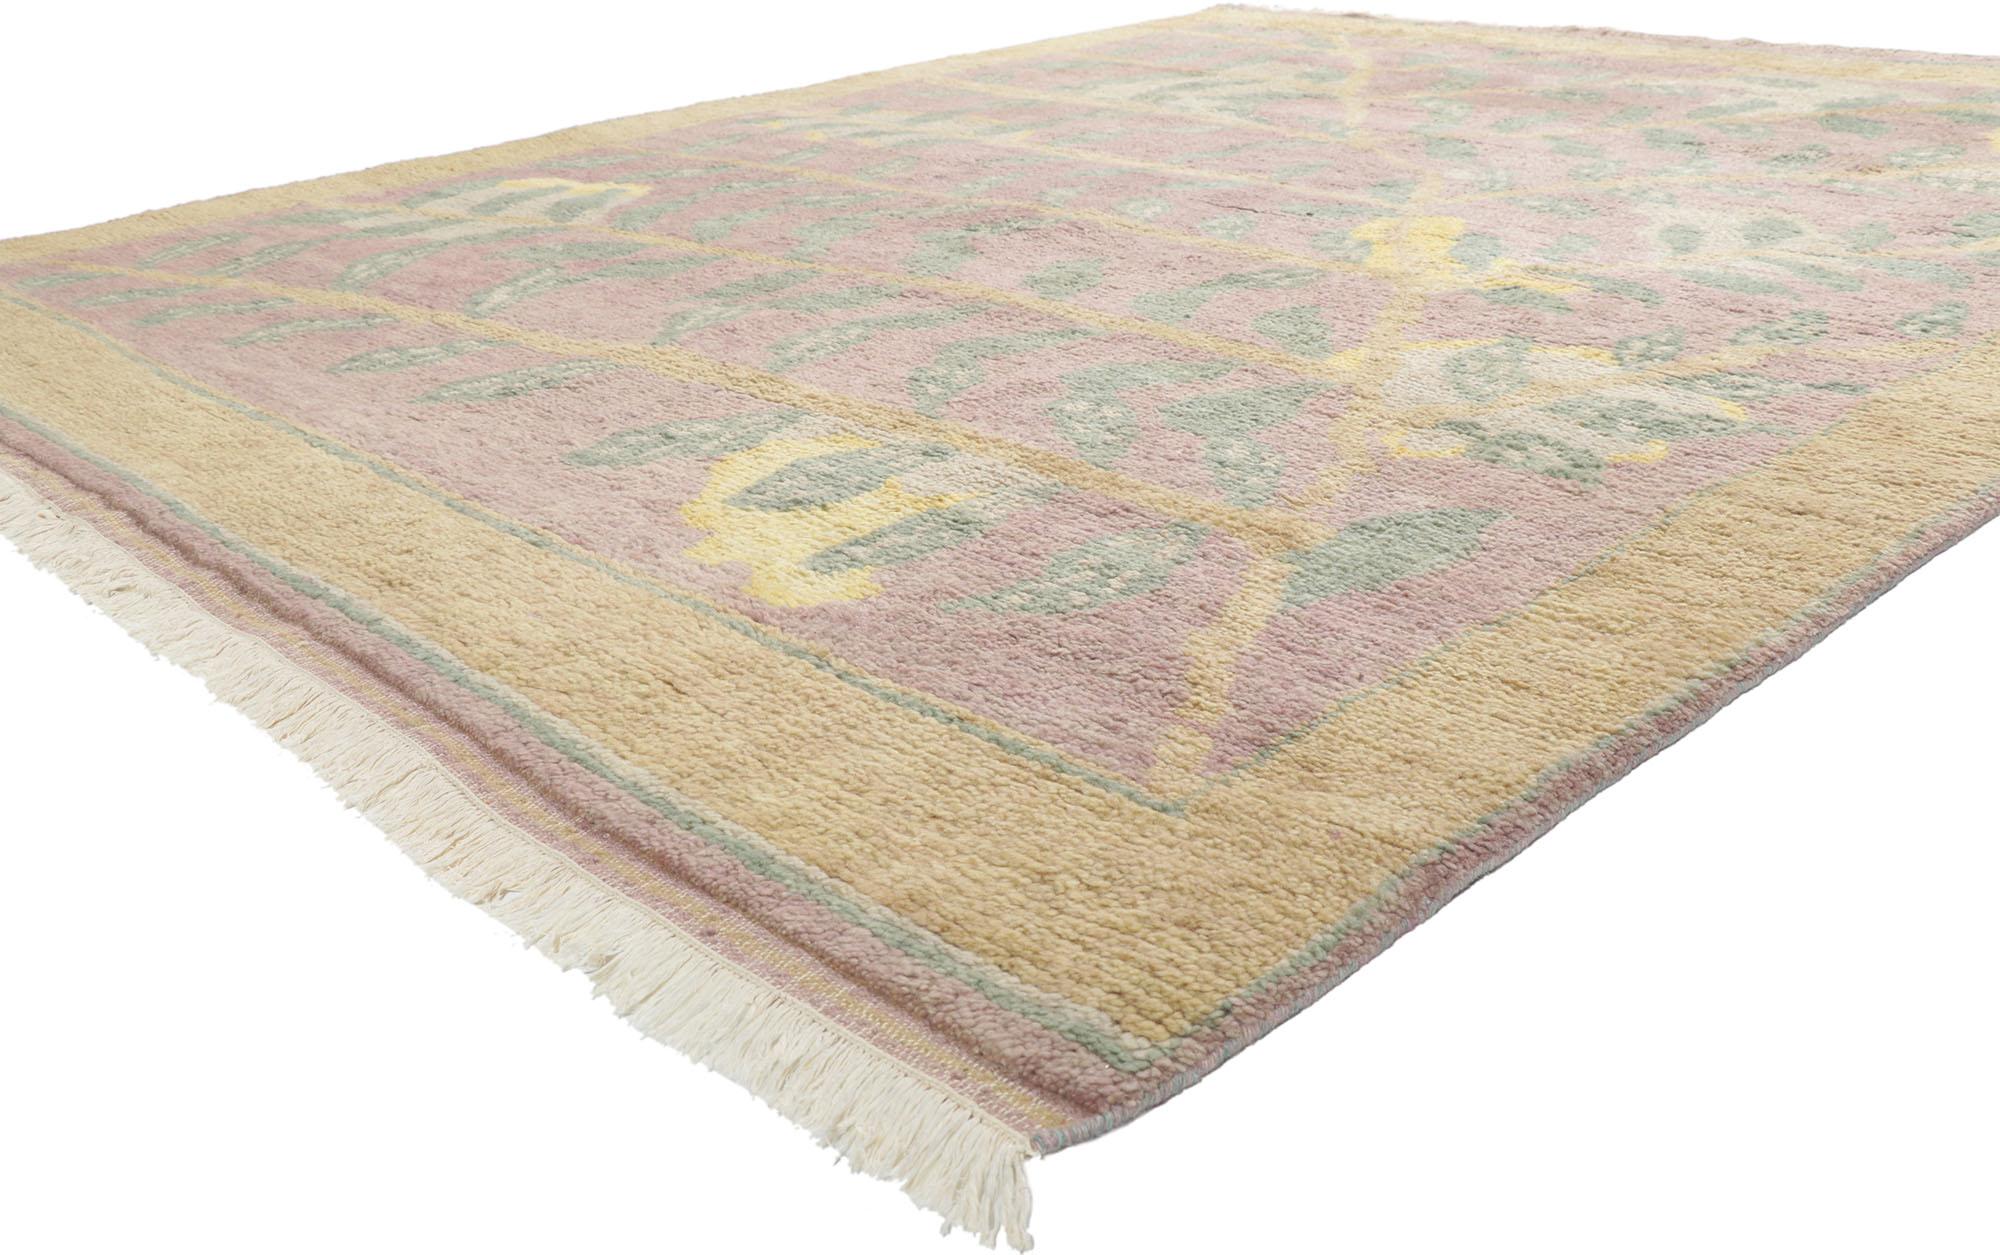 30769 Modern Moroccan Area Rug with Biophilic Design, 08'02 x 09'10. Inspired by the principles of biophilic design, this meticulously hand-knotted wool modern Moroccan area rug emerges as a harmonious expression of nature-infused aesthetics. Woven